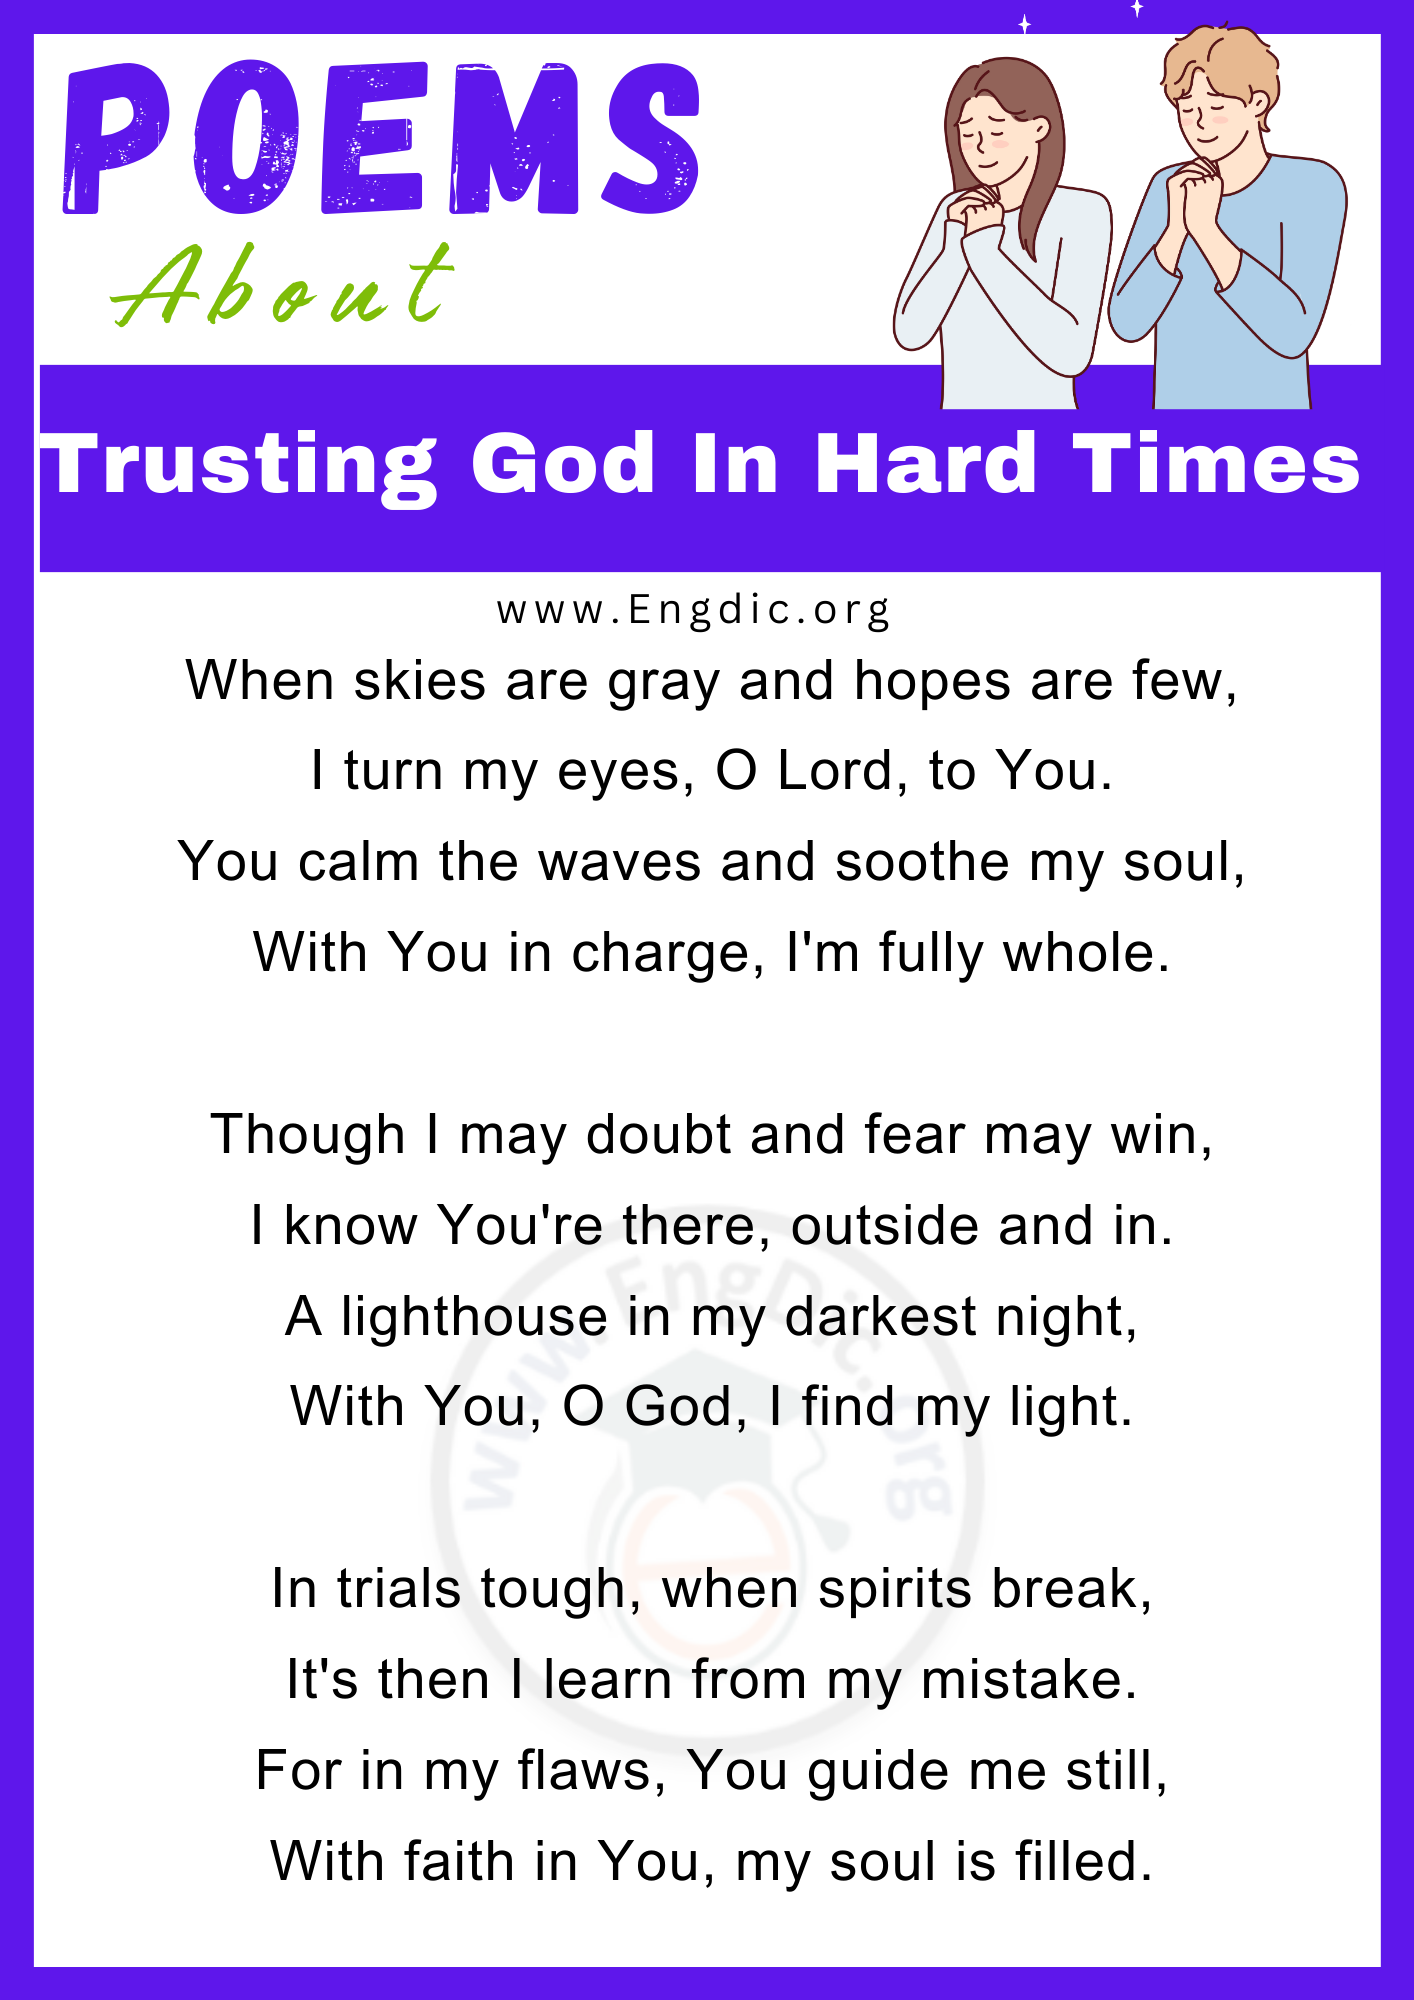 Poems for Trusting God In Hard Times